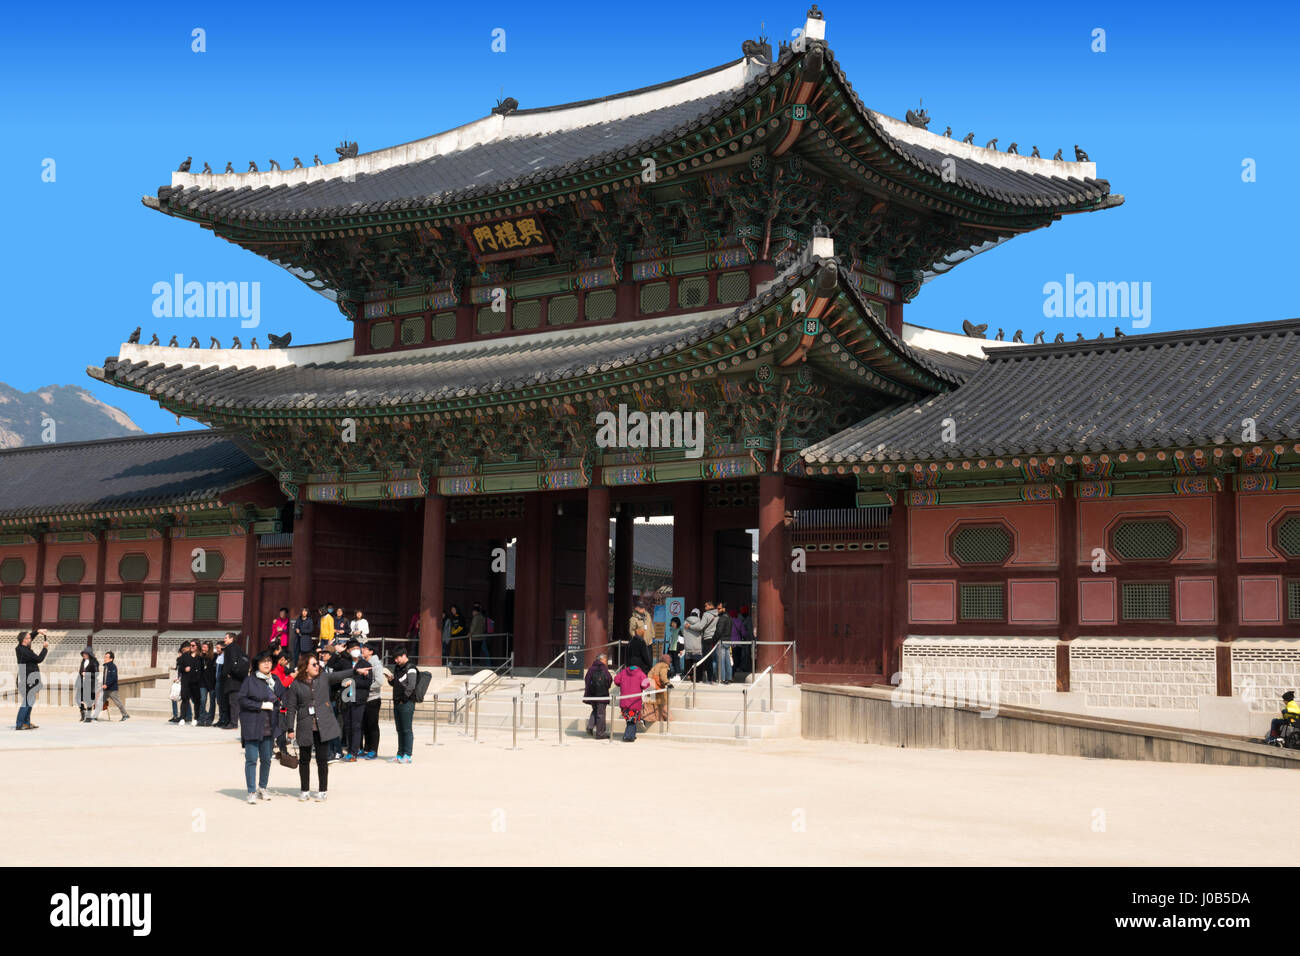 Locals and tourists at Gyeongbokgung palace, the main royal palace of the Joseon dynasty. Built in 1395, located in northern Seoul, South Korea Stock Photo